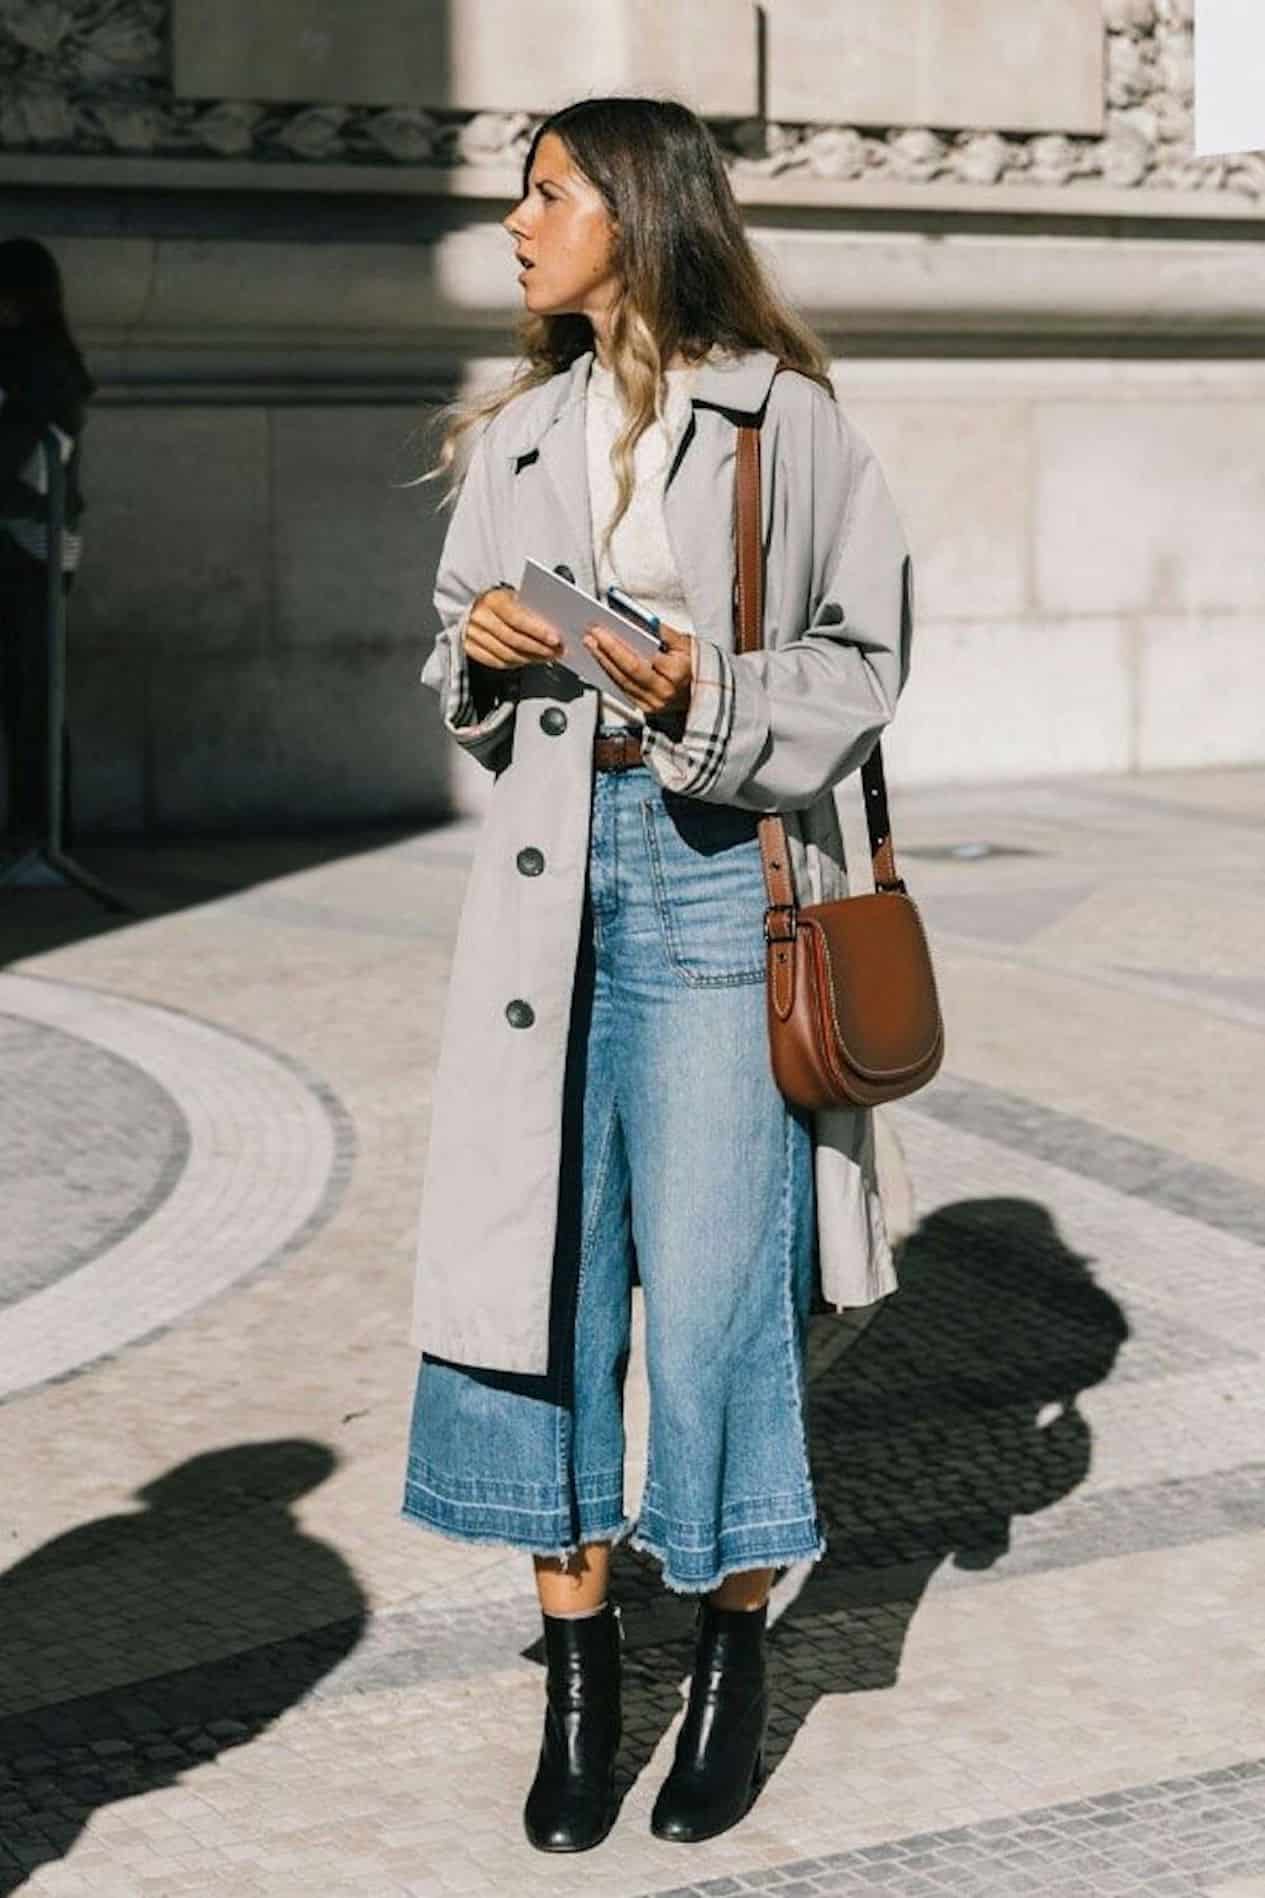 Image of a woman wearing cropped wide leg jeans, ankle boots and an over coat.